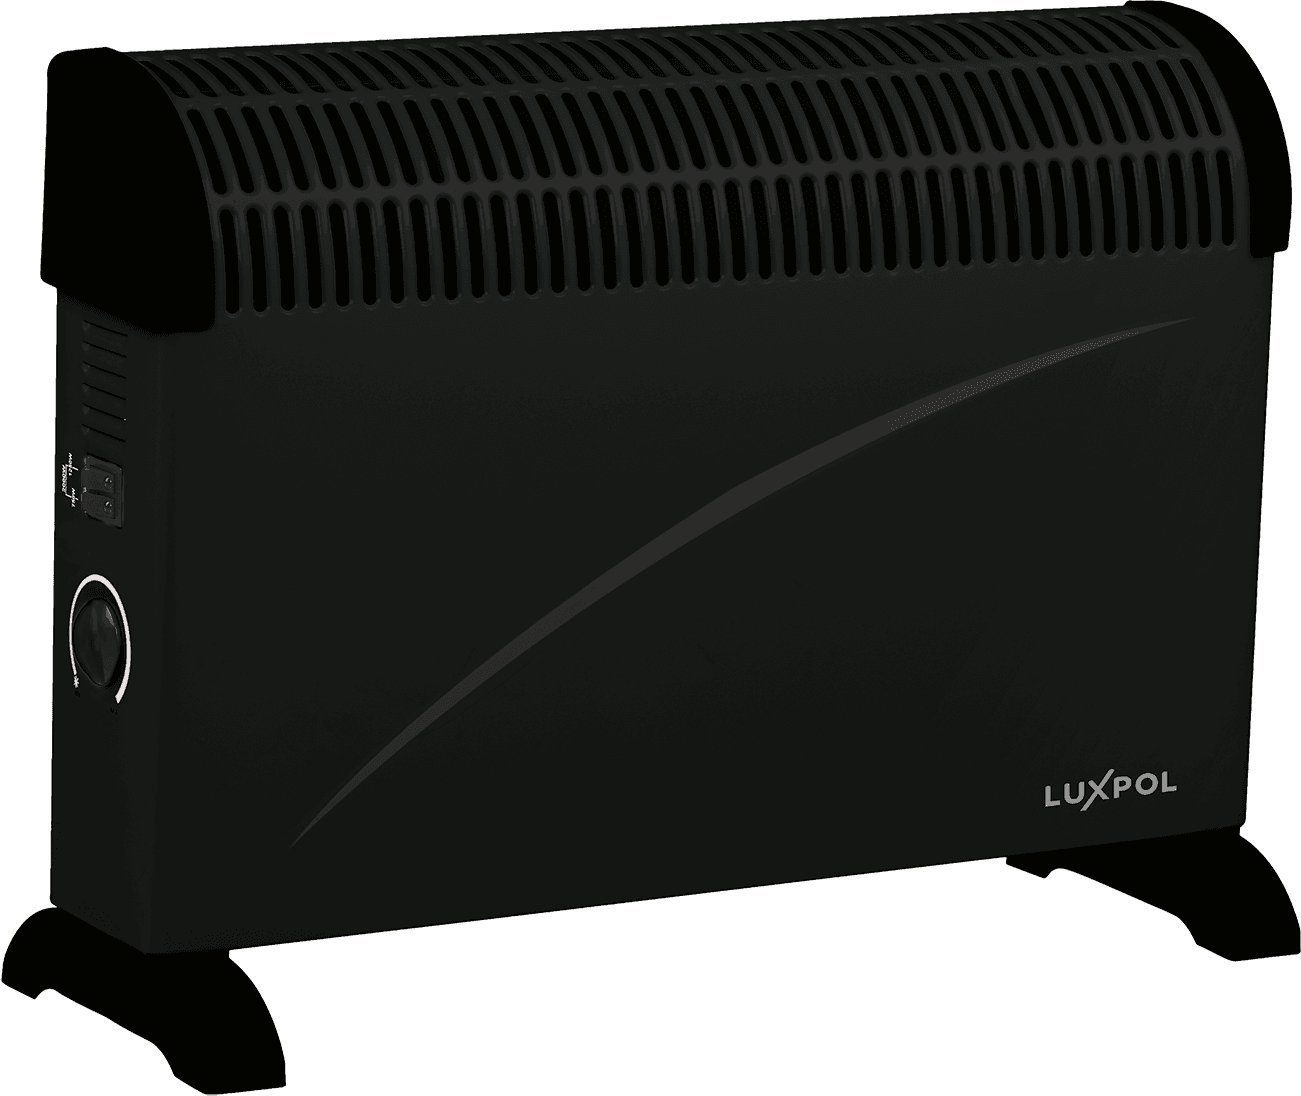 Incalzitor convector Luxpol LCH-12C 2000 W